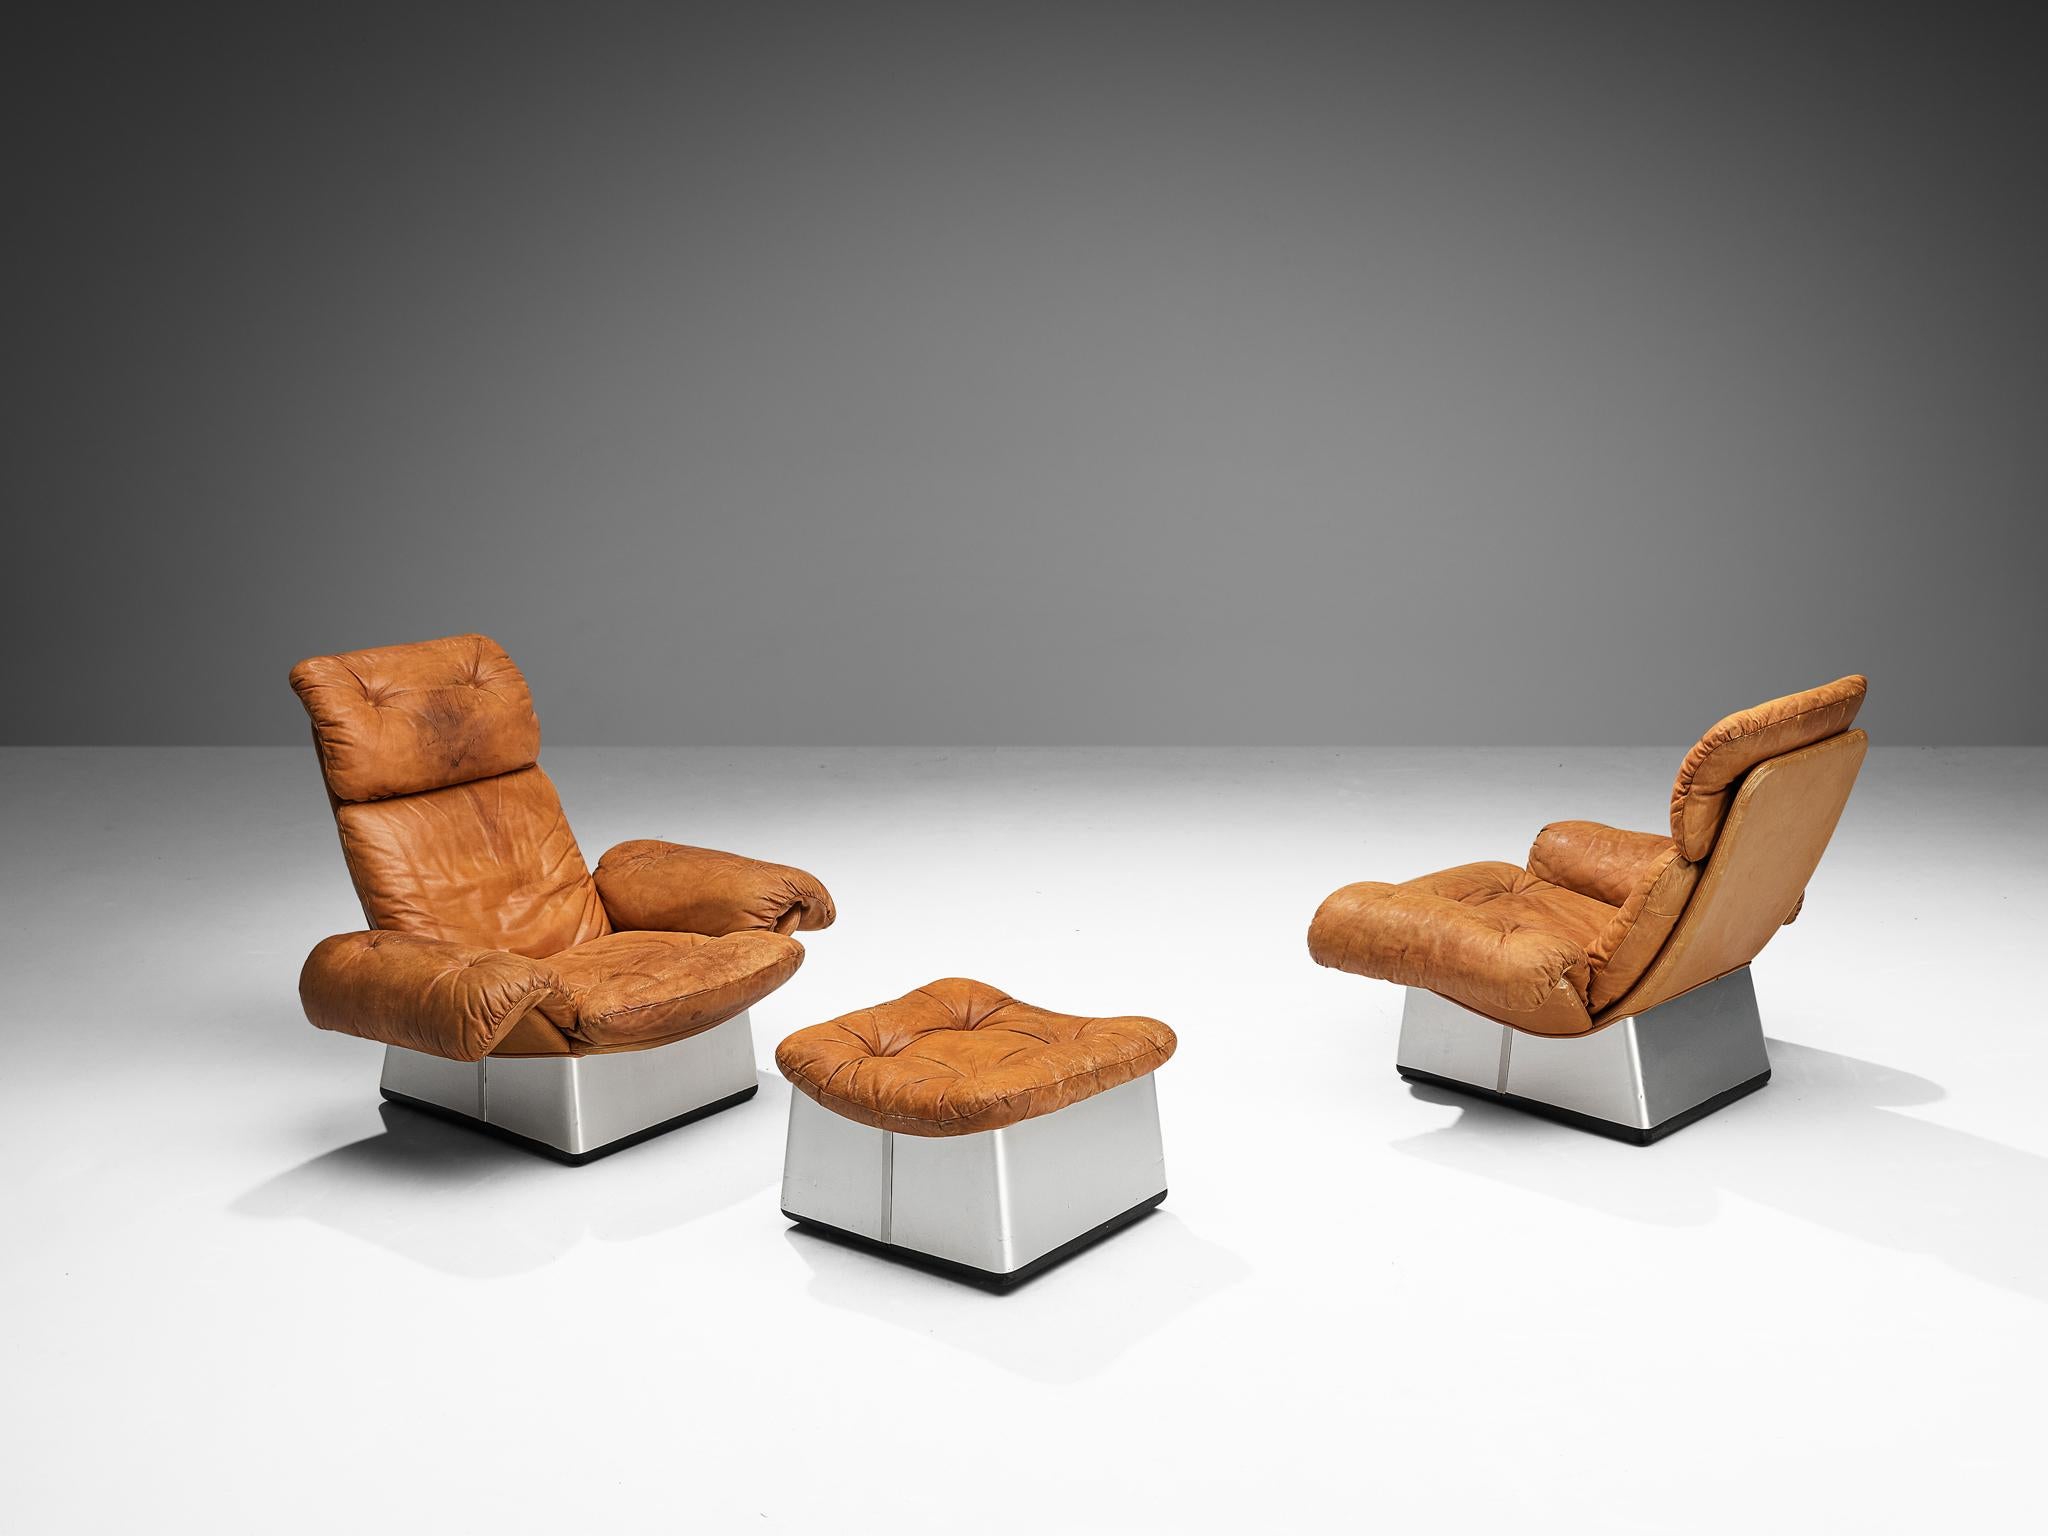 Lounge set consisting of two chairs and an ottoman, aluminum, leather, Italy 1970s

Pair of lounge chairs and ottoman made in Italy in the 1970s. These chairs strongly represent the essence of furniture design of the 1970s, going beyond the strict